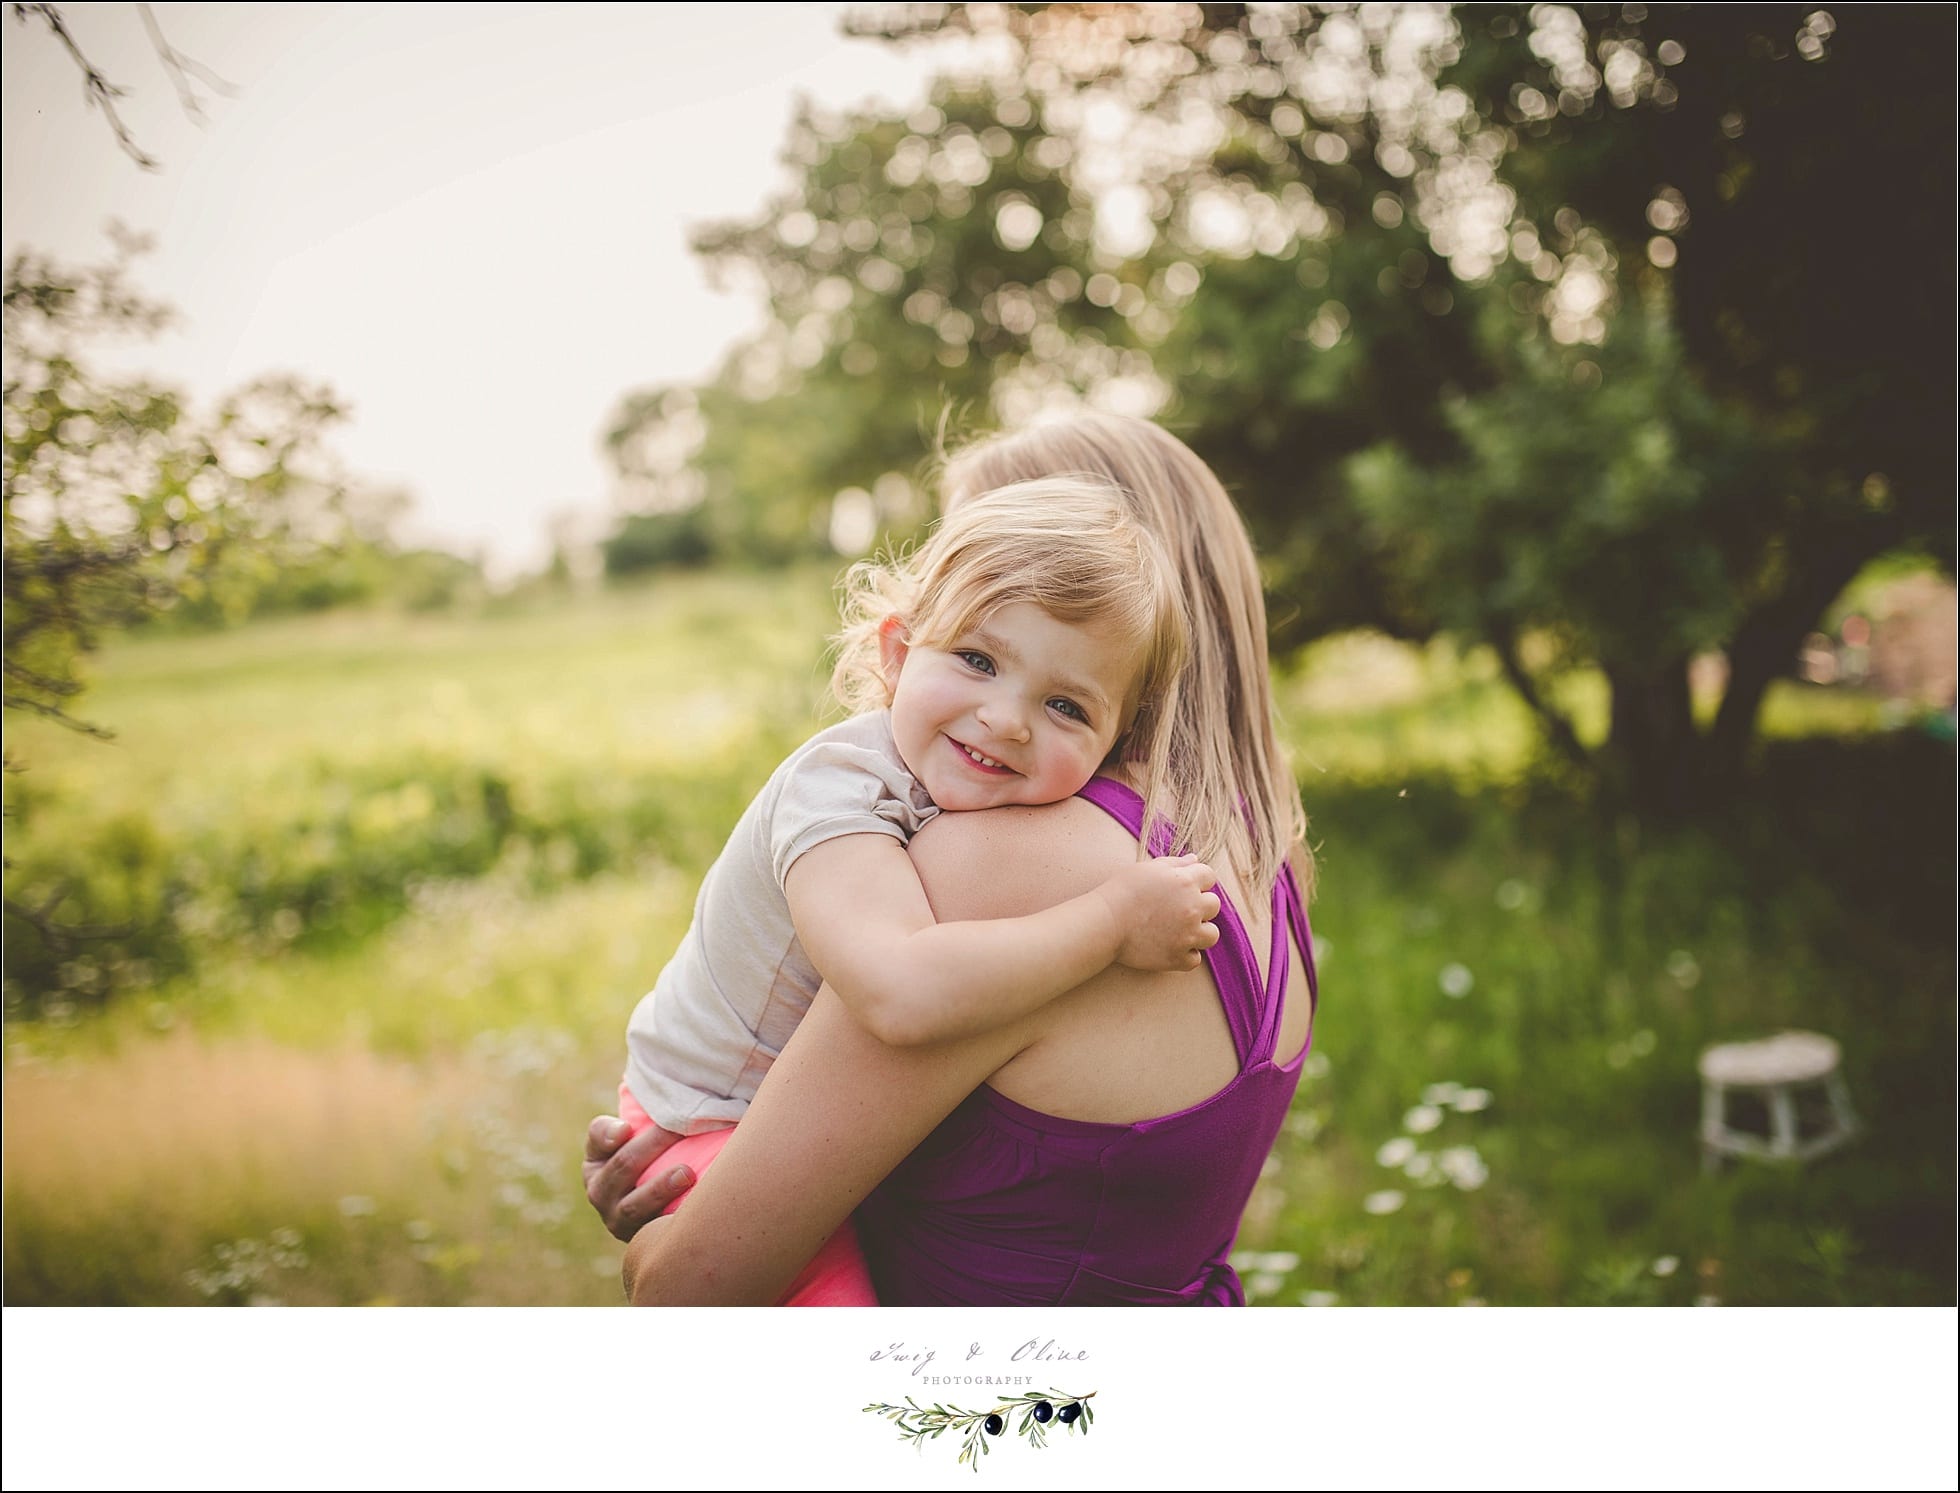 hugs, purple dress, moms and daughters, maternity session, family session 